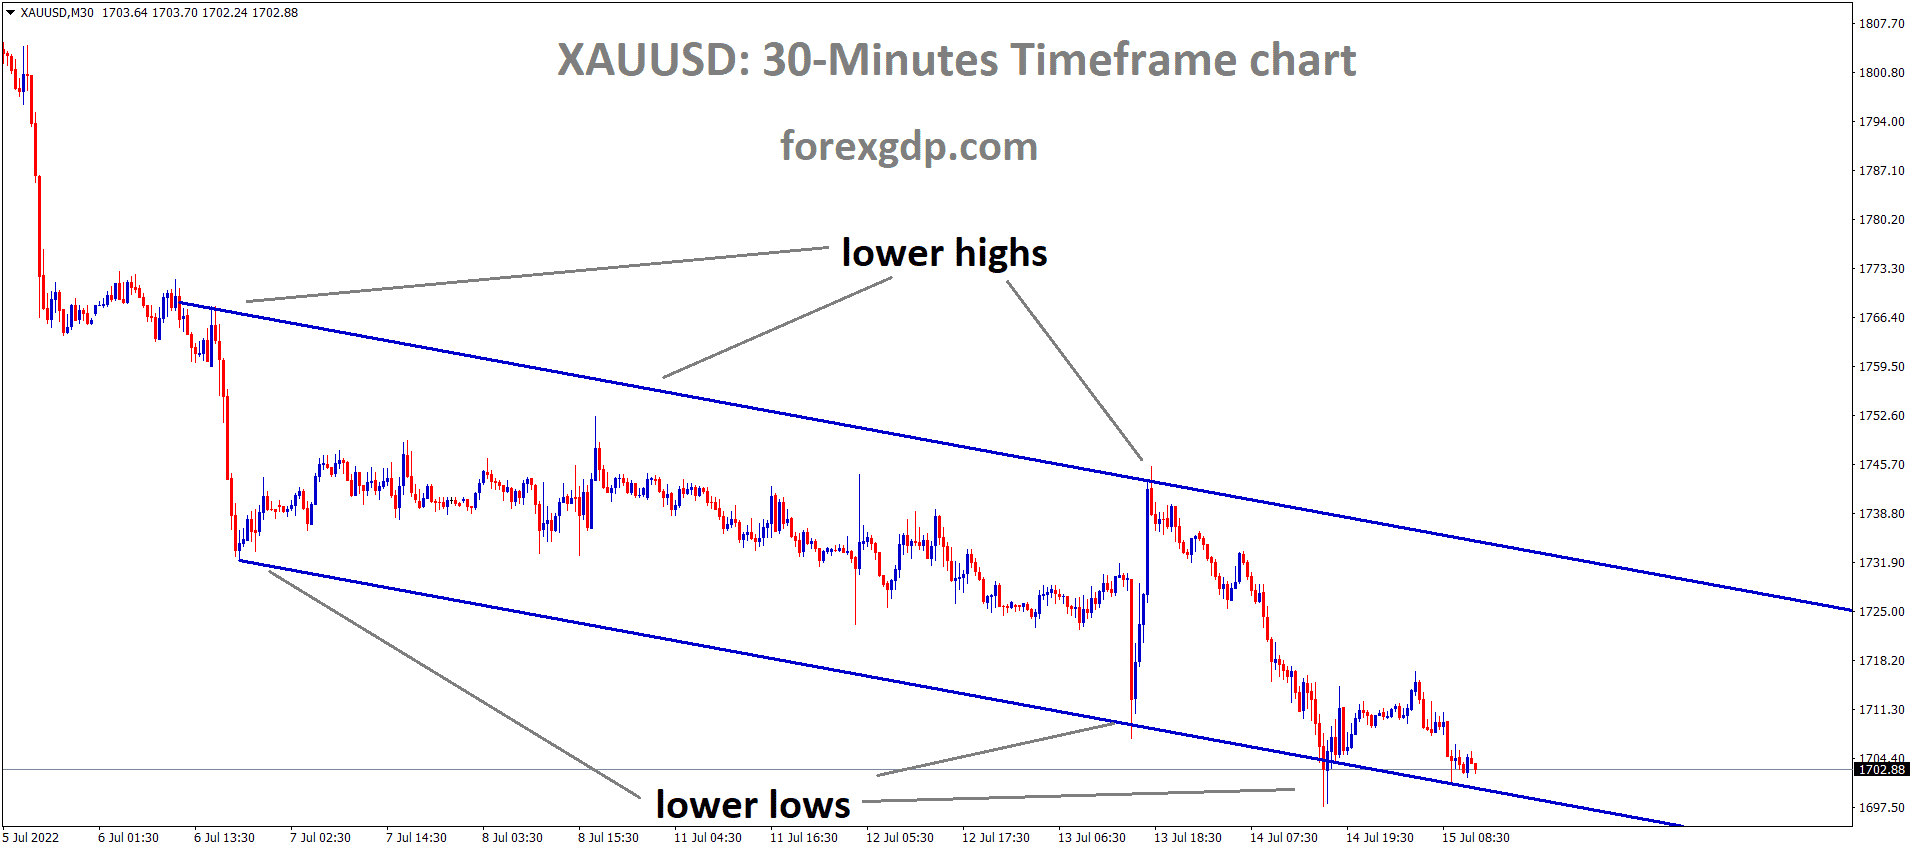 XAUUSD Gold price is moving in the Descending channel and the market has reached the Lower Low area of the channel